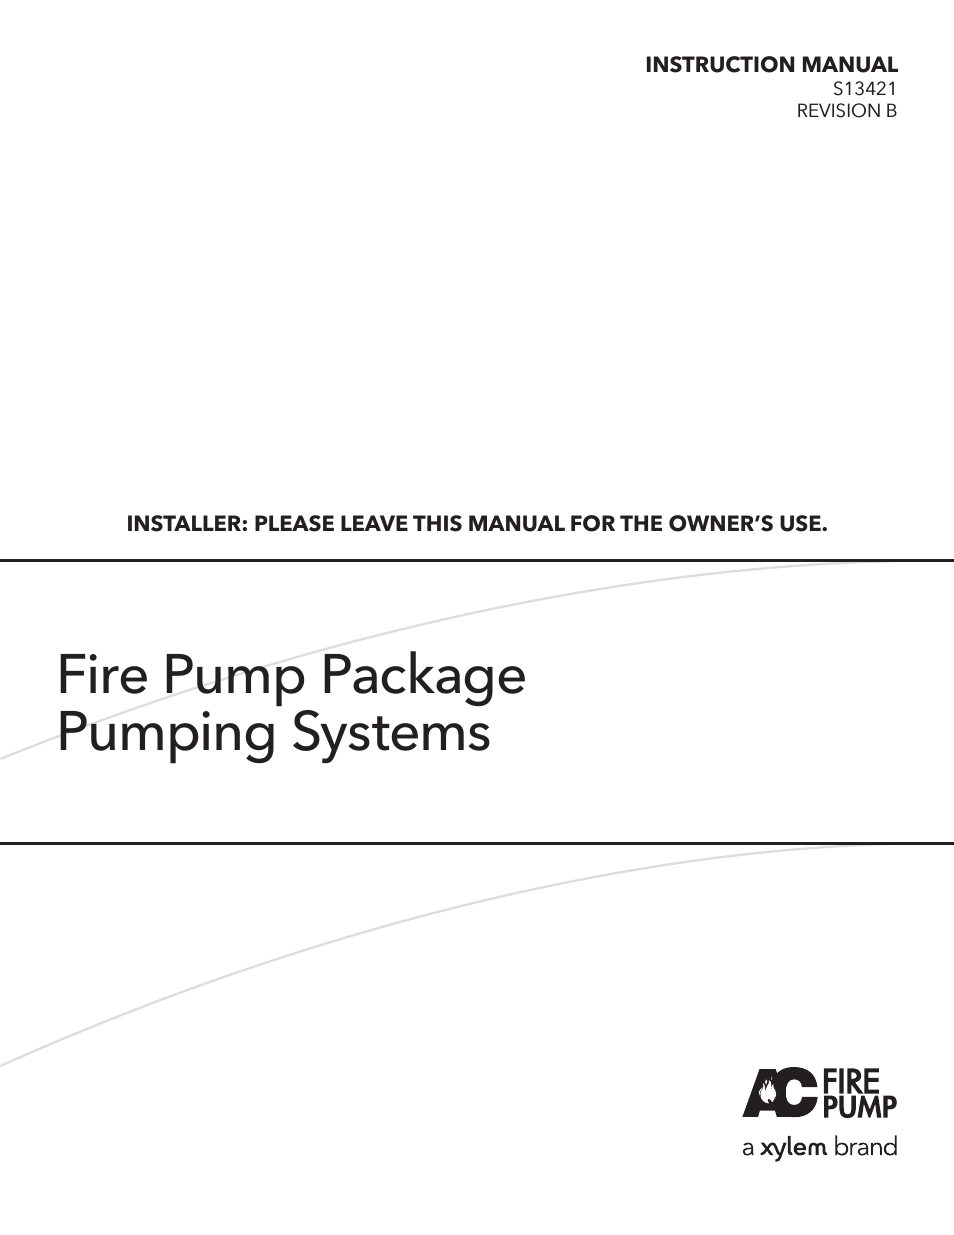 Fire Pump Package Pumping Systems S13421 REV.B